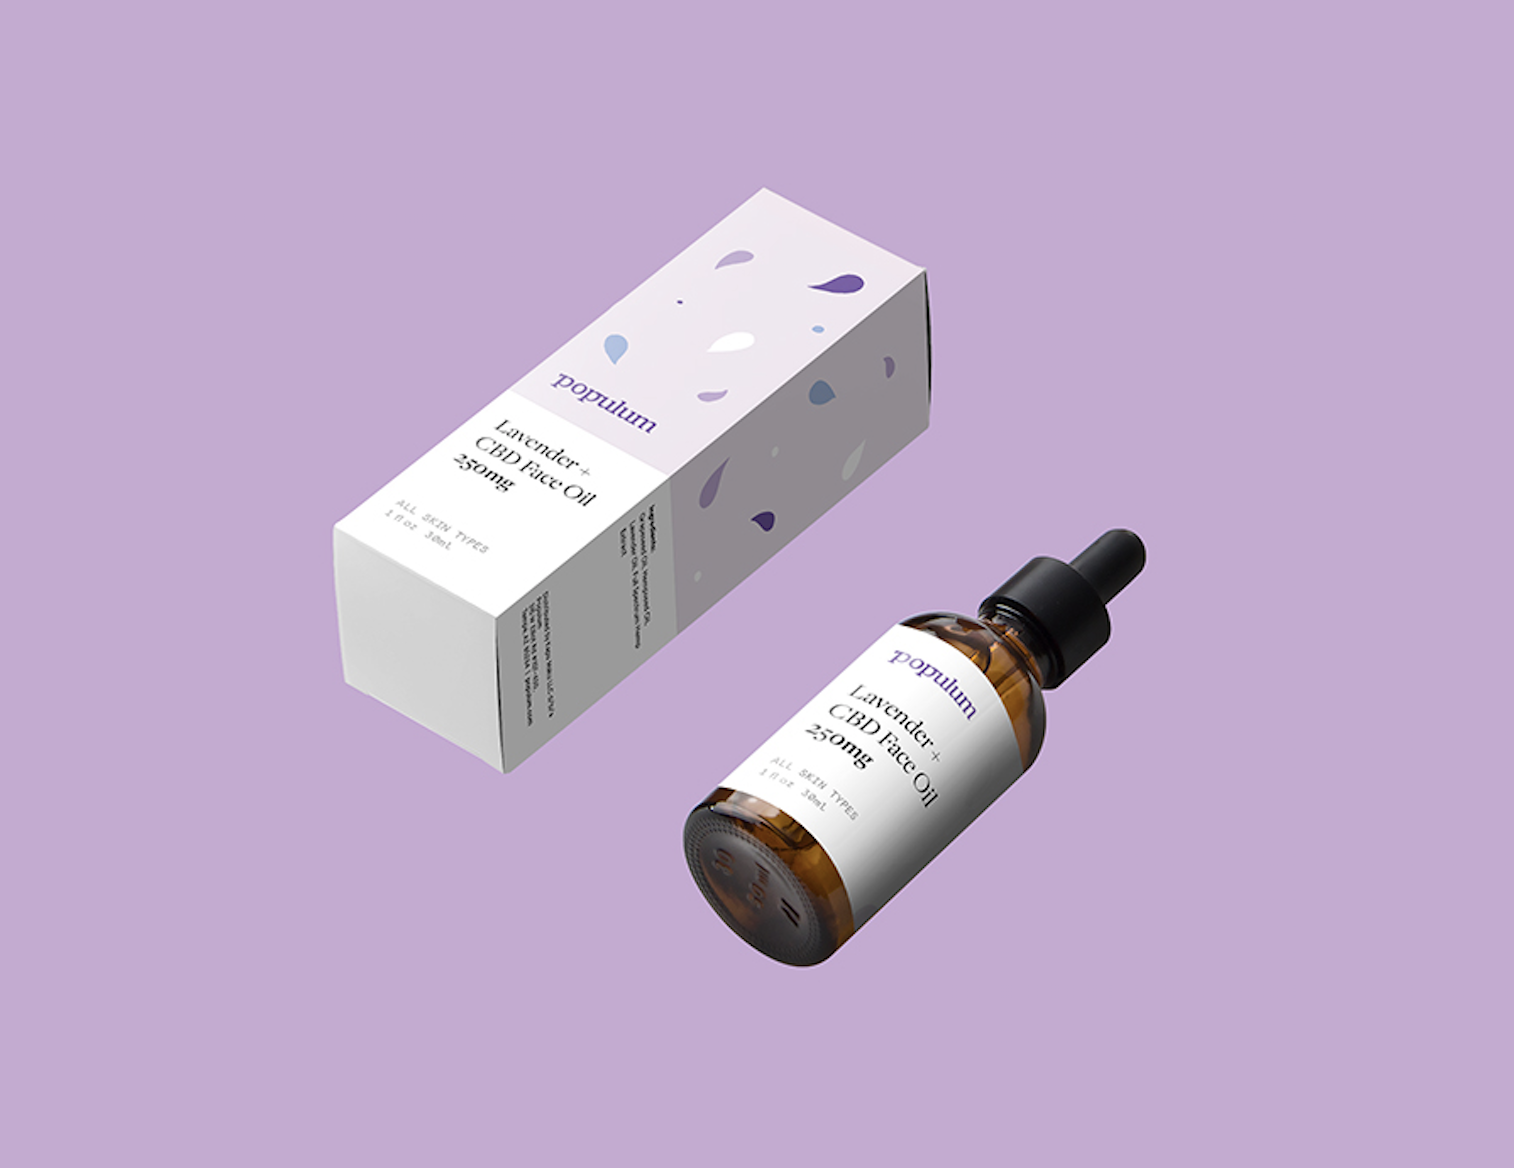 Populum Launches CBD-Infused Face Oil to Help Revitalize and Rejuvenate Skin